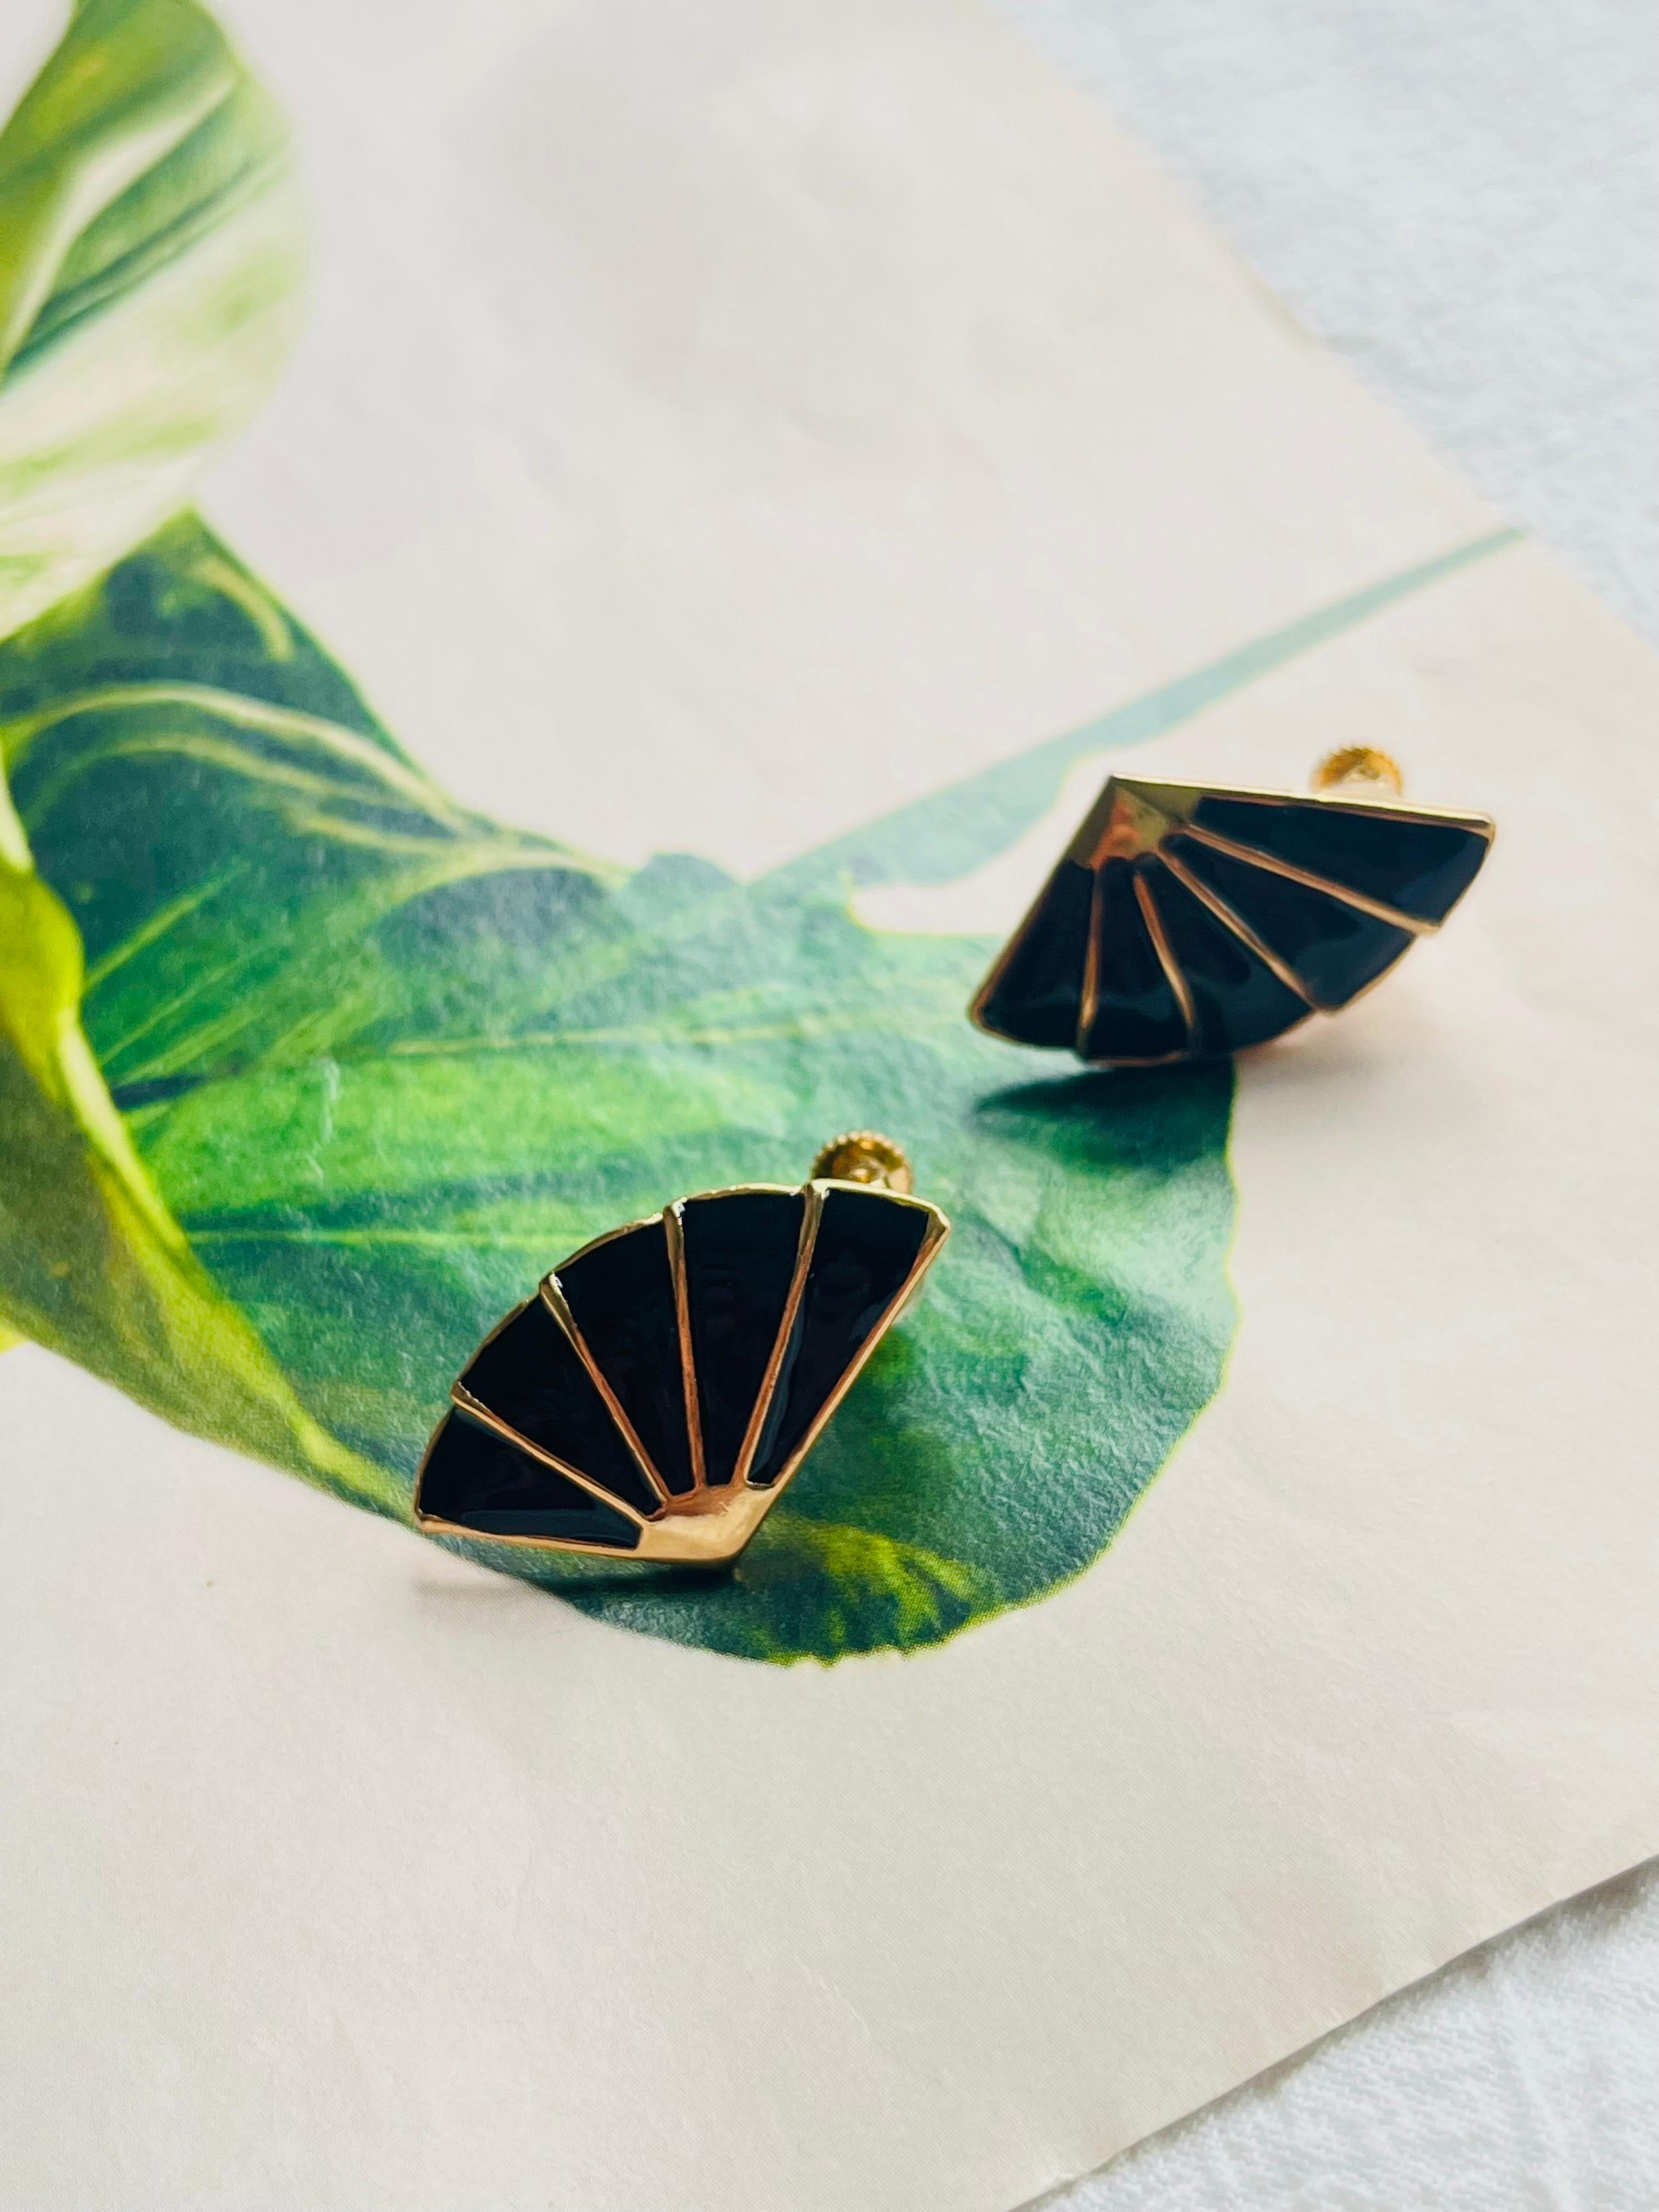 Glow Black Enamel Fan Geometric Elegant Modernist Clip Earrings, Gold Tone, Swarovski Element

The cost is very high. 100% handmade. Excellent gift for lady. Fine handcraft.

Material: Enamel, Gold Plated Metal.

Size: 2.8*1.5 cm.

Weight: 5